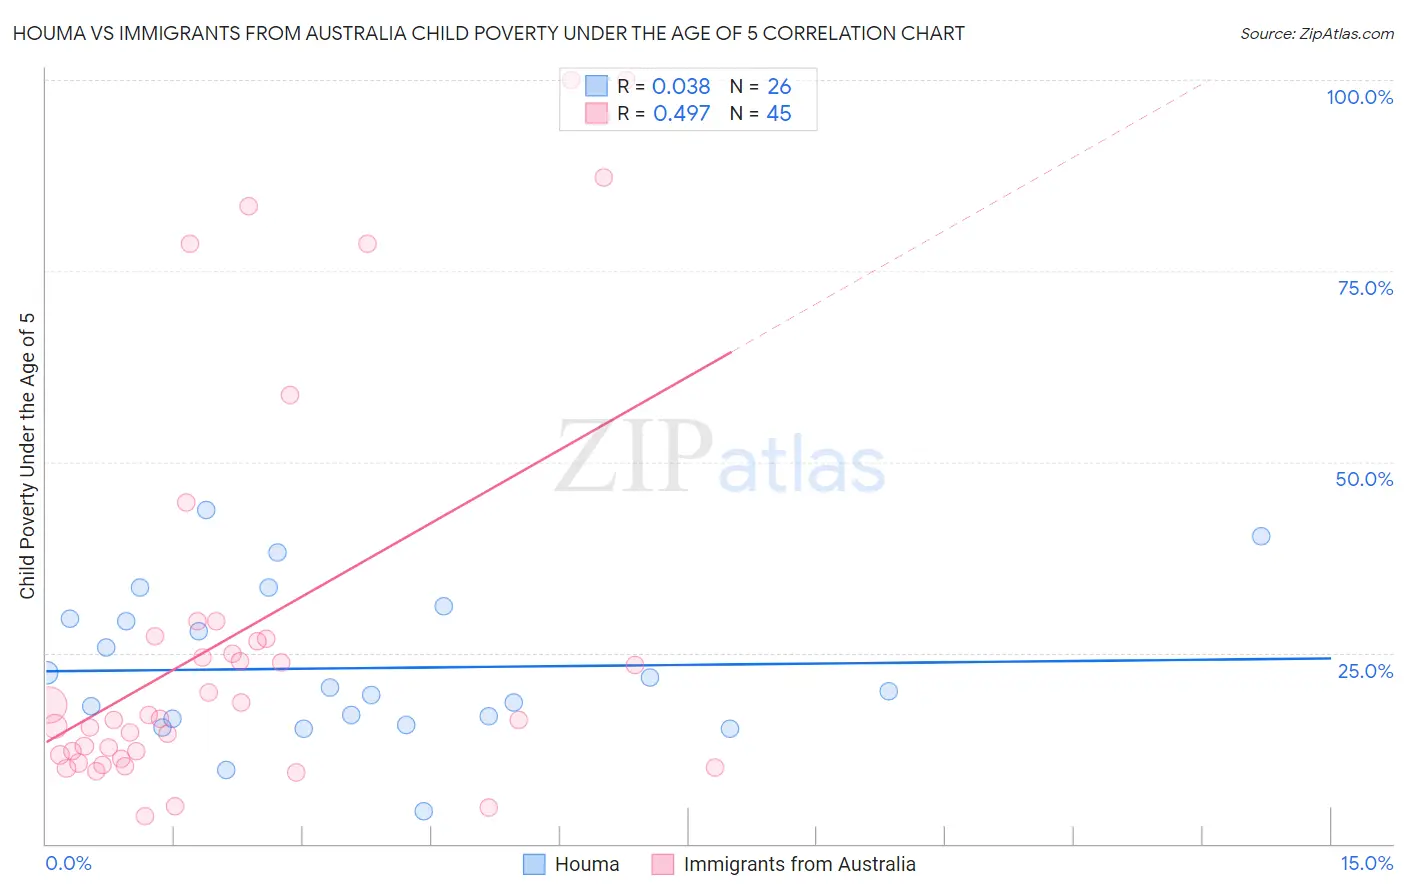 Houma vs Immigrants from Australia Child Poverty Under the Age of 5